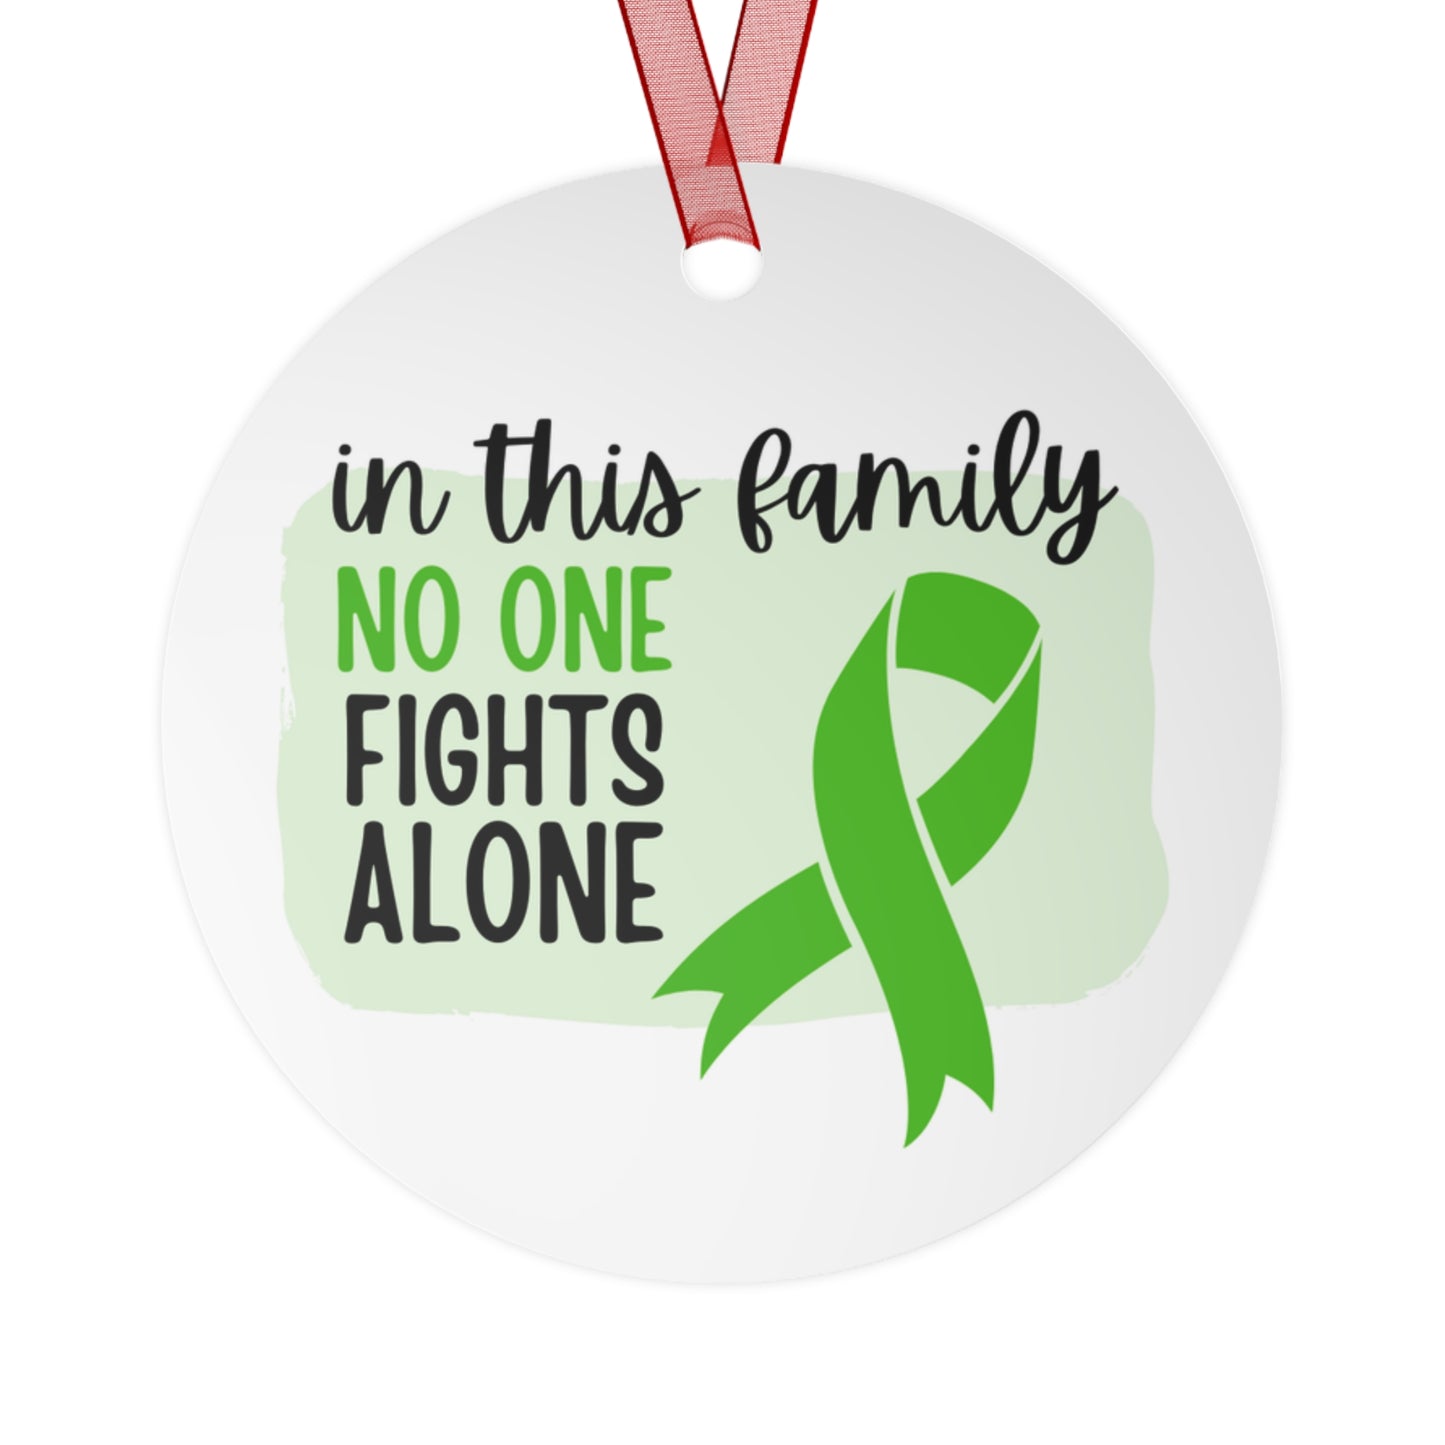 Gallbladder Cancer Ornament- Green Ribbon Awareness -In this family no one fights alone - Support for friend - Christmas Decor